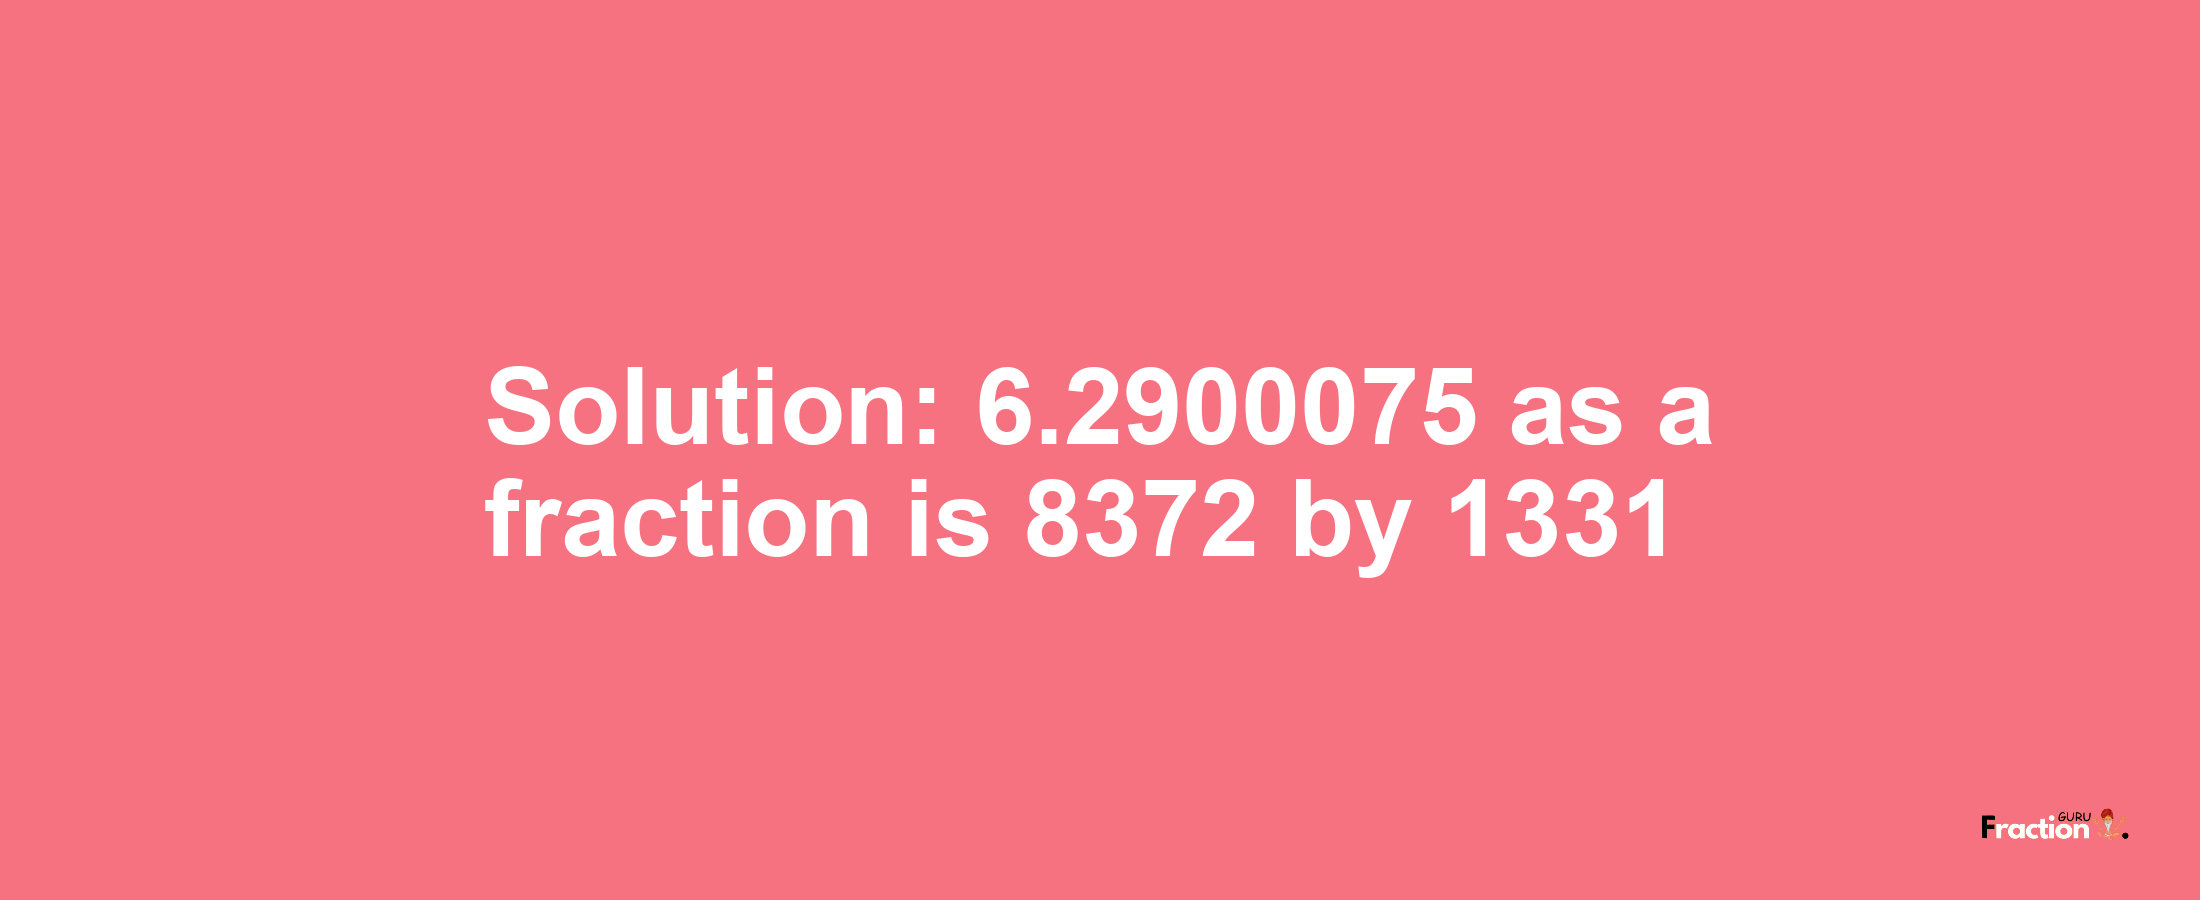 Solution:6.2900075 as a fraction is 8372/1331